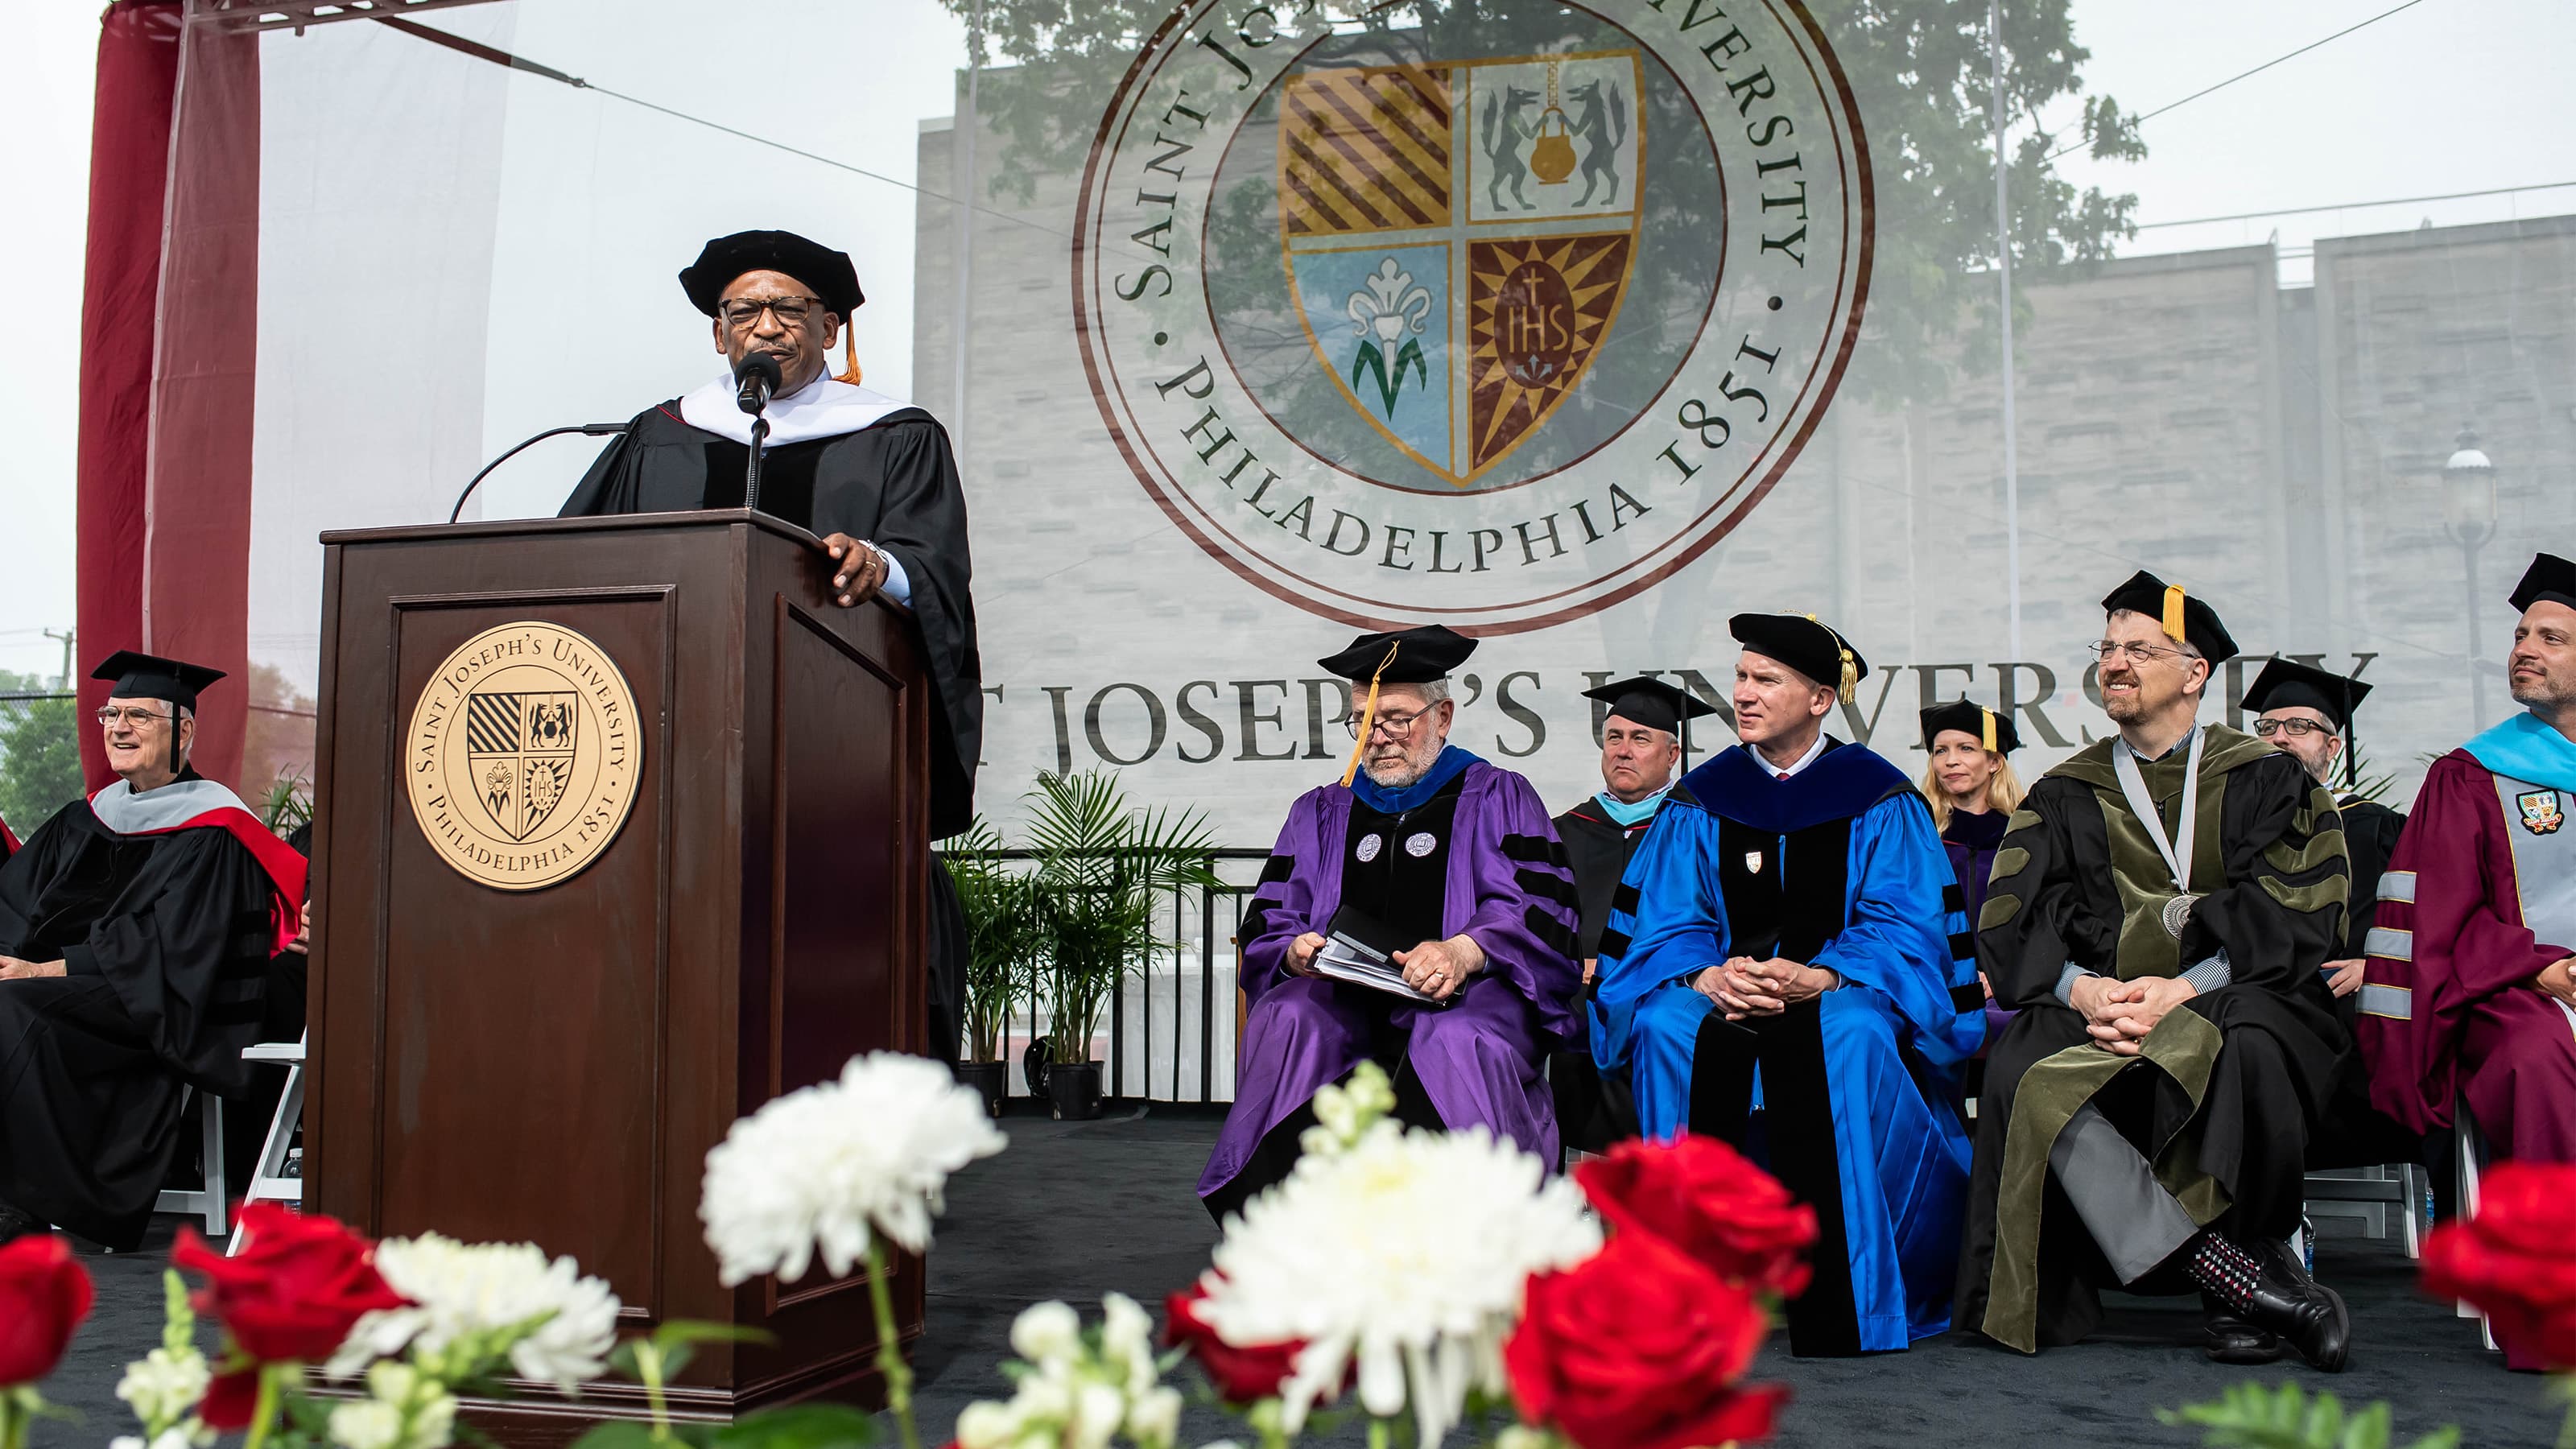 Saint Joseph's University outdoor commencement with faculty on stage and podium